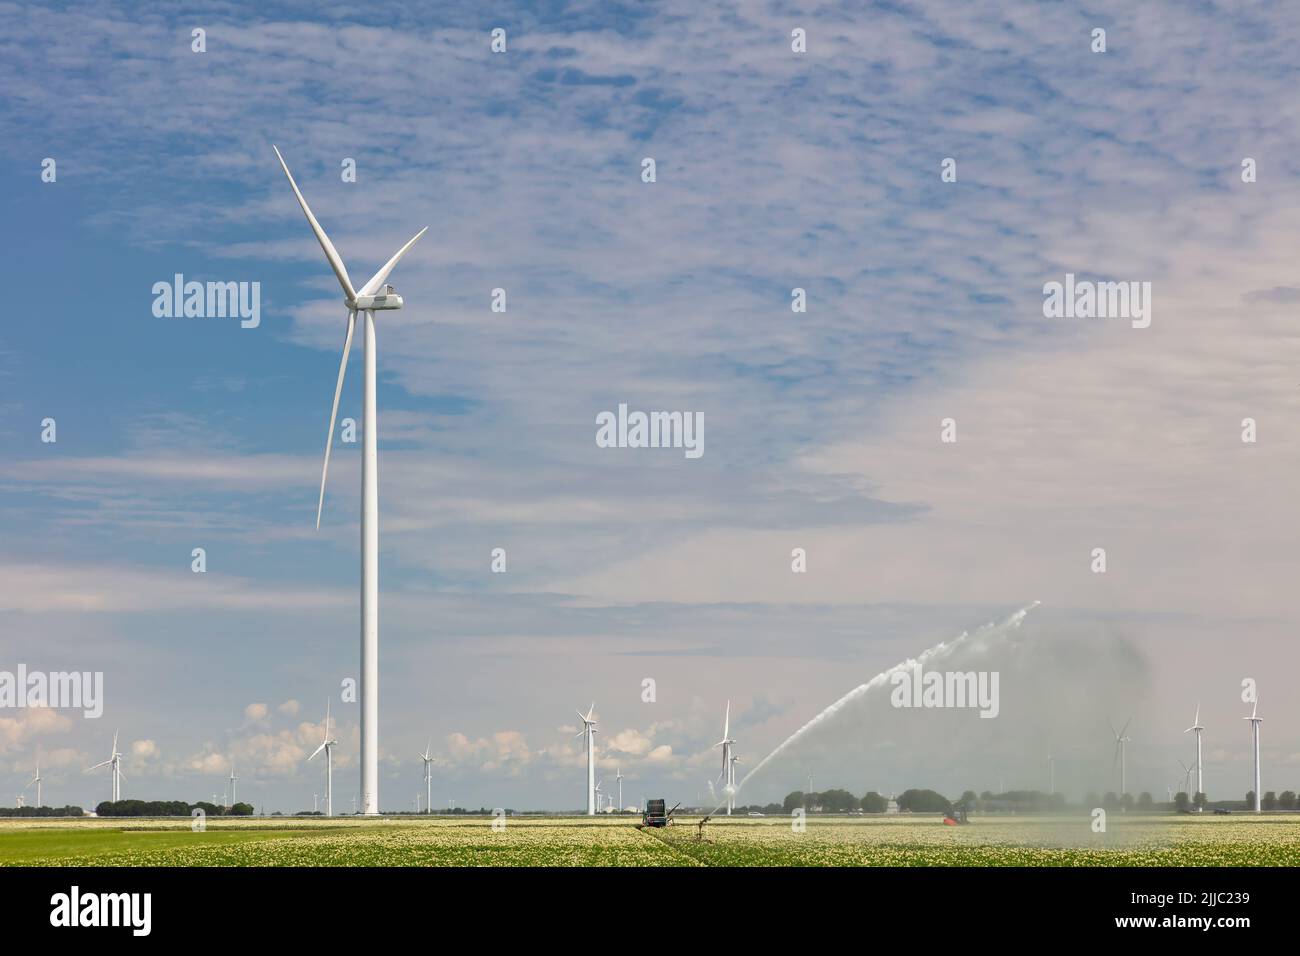 Irrigation sprinkler on farmland in front of a wind park with wind turbines in Flevoland, The Netherlands Stock Photo